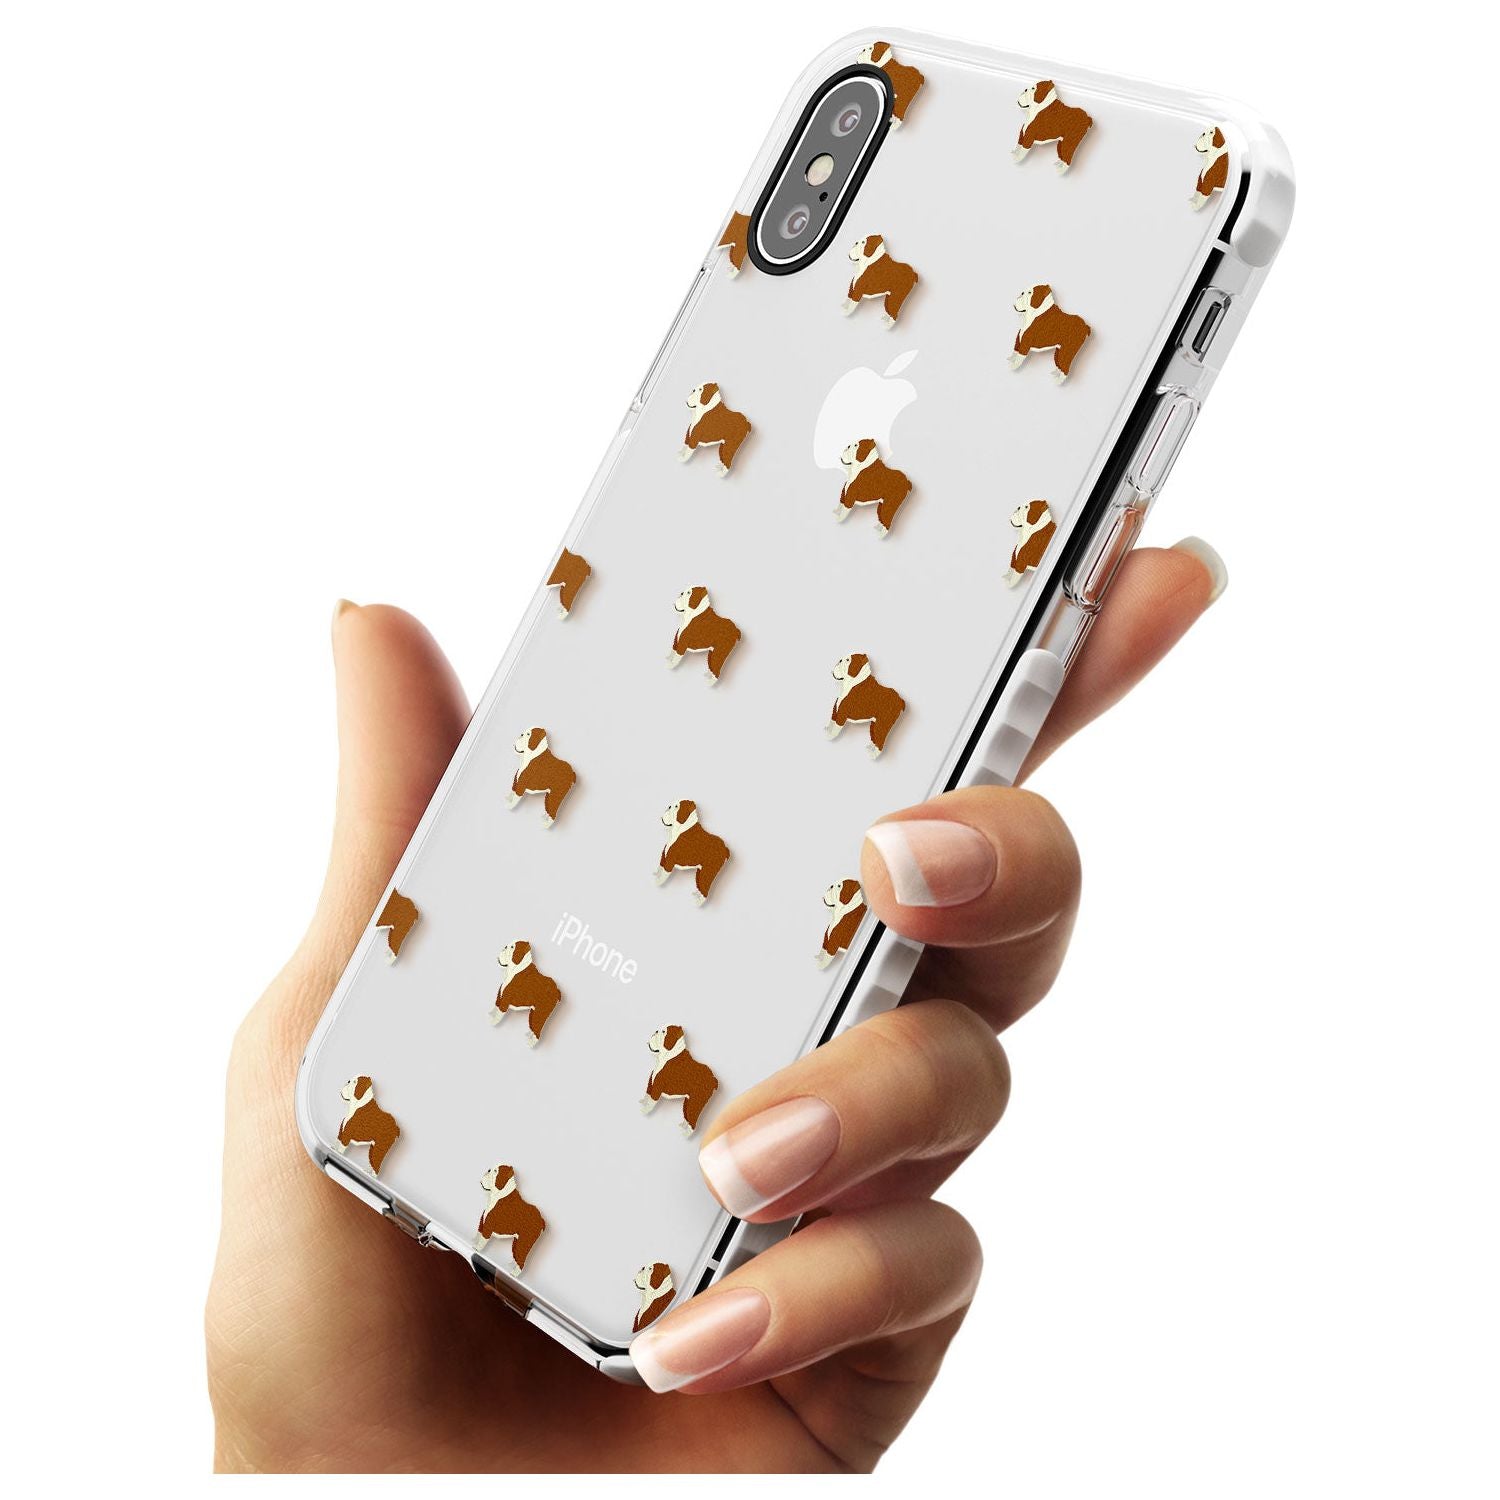 English Bulldog Dog Pattern Clear Impact Phone Case for iPhone X XS Max XR